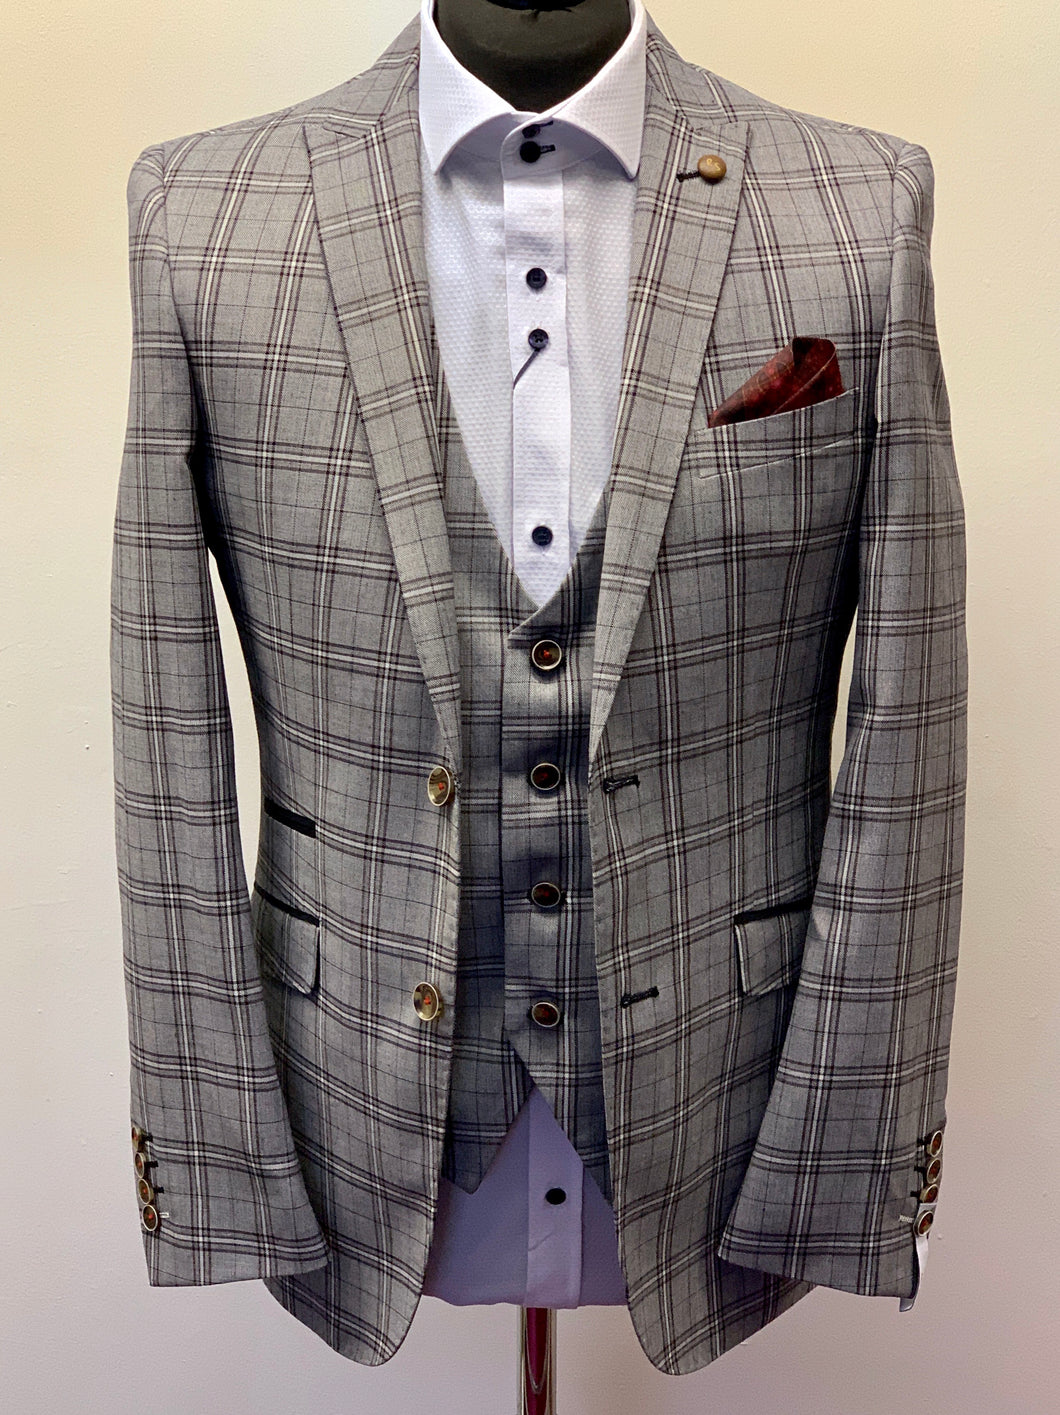 Robert Simon Grey Windowpane Check Jacket worn with a matching waistcoat and textured shirt and red/burgundy pocket square